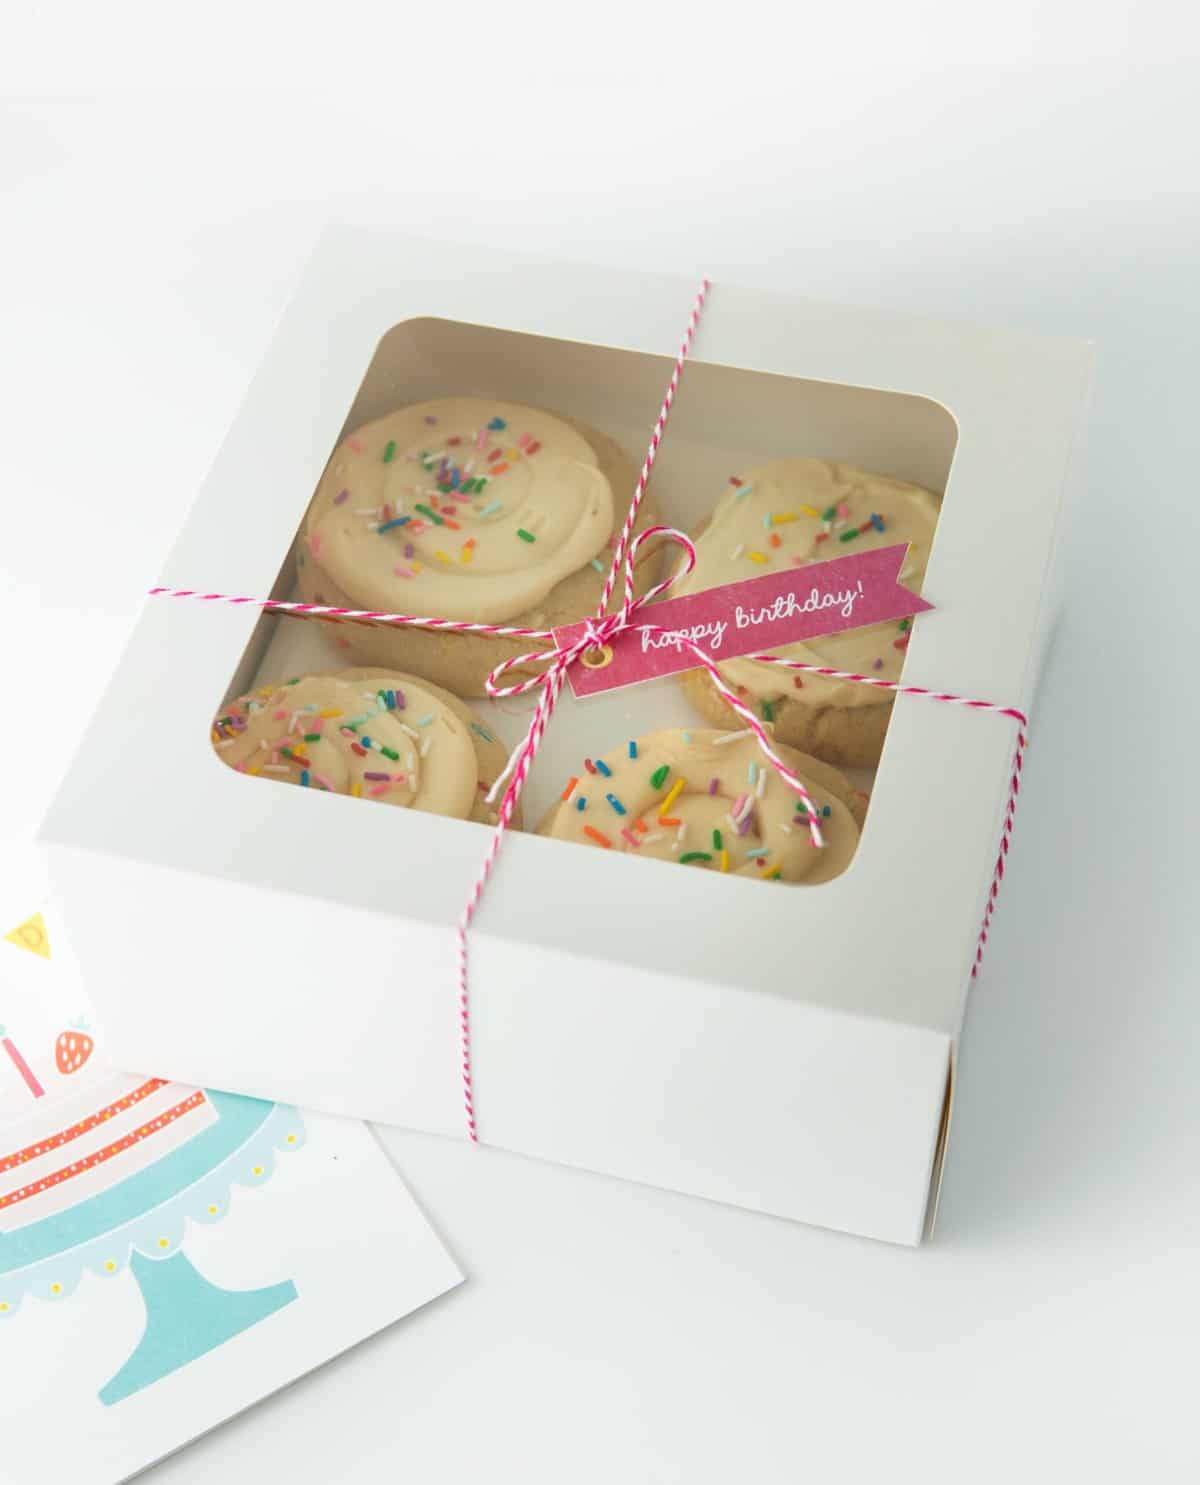 square white bakery box with window showing frosted sugar cookies